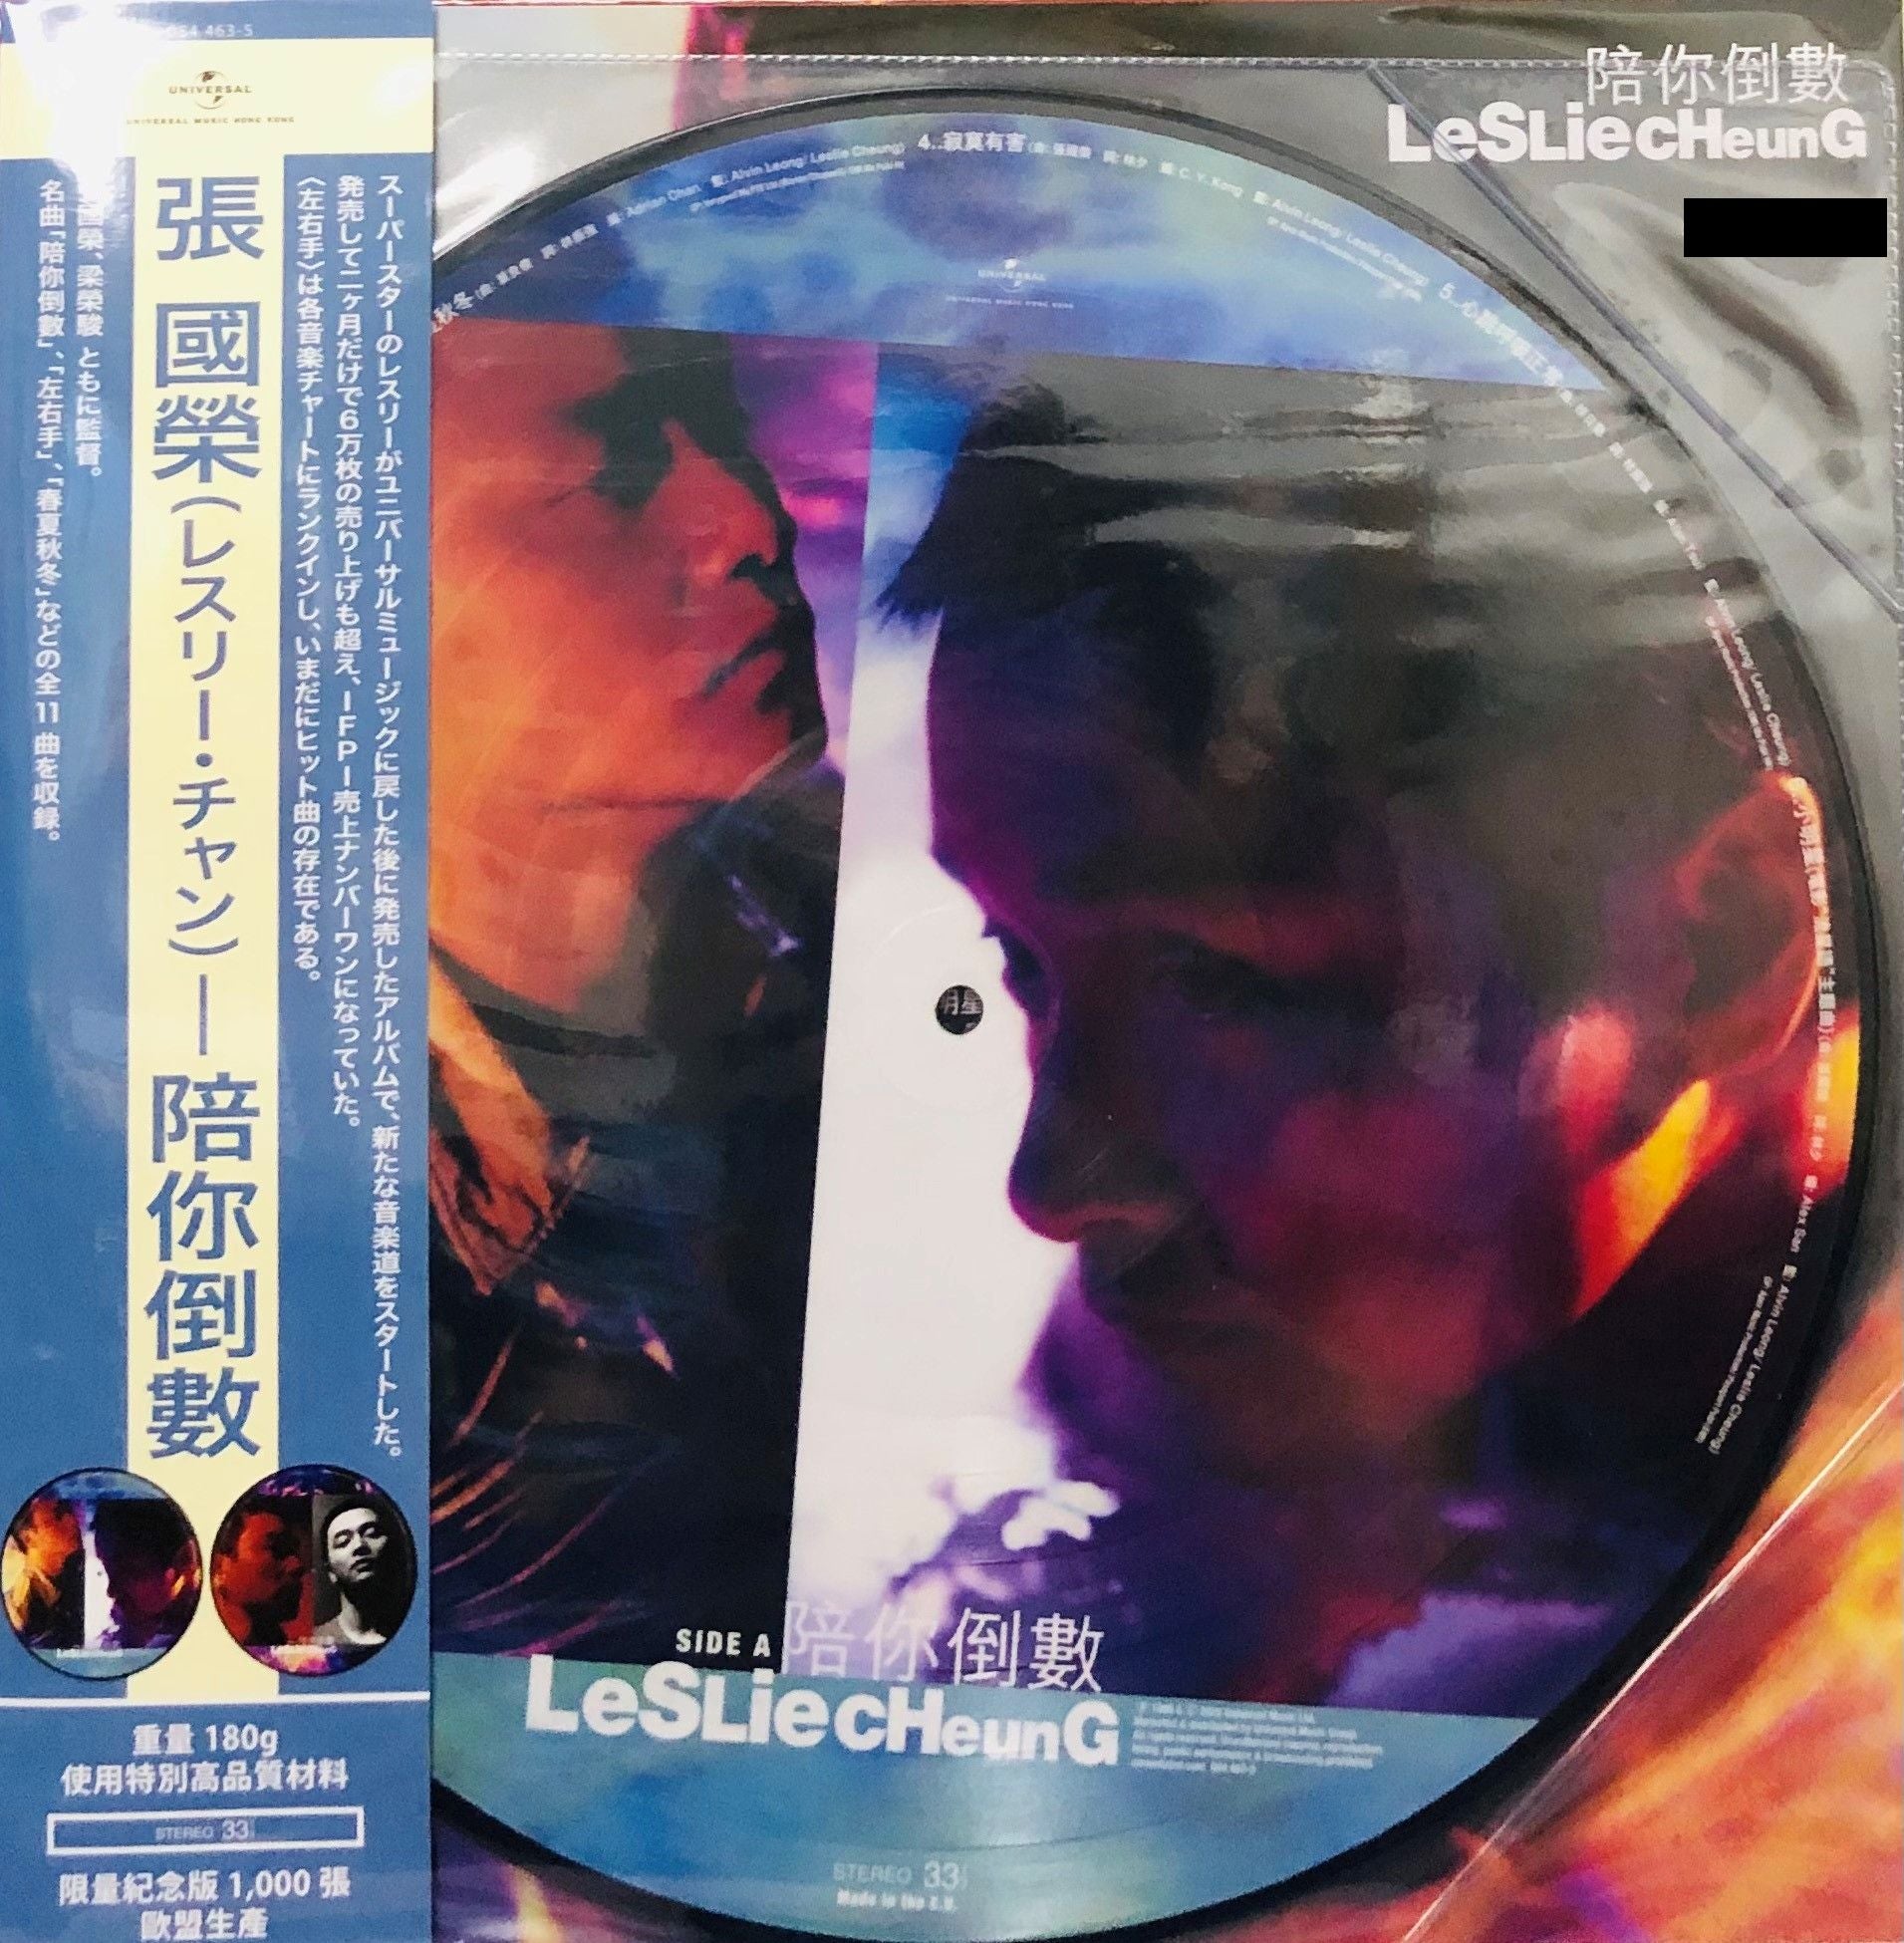 LESLIE CHEUNG - 張國榮 陪你倒數 (PICTURE VINYL) MADE IN EU